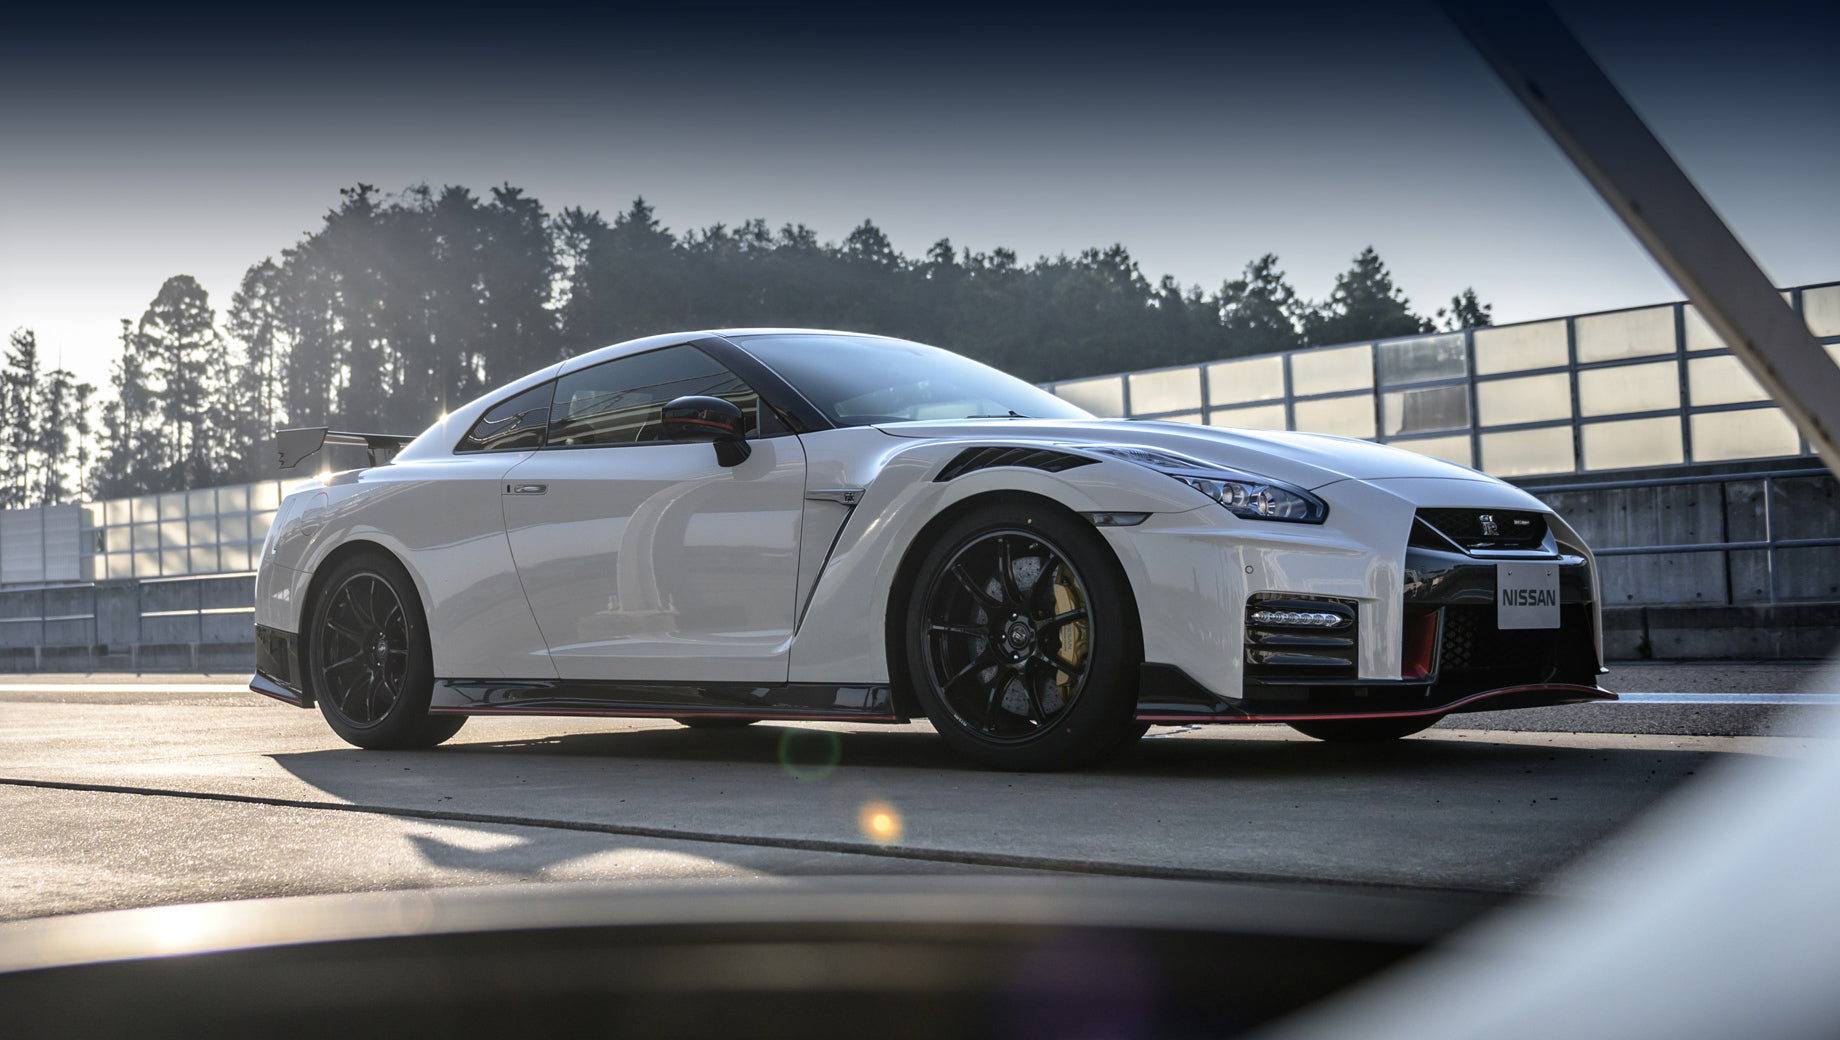 Nissan GT-R R35 Final Edition Coming 2022 With 710 Horsepower: Report